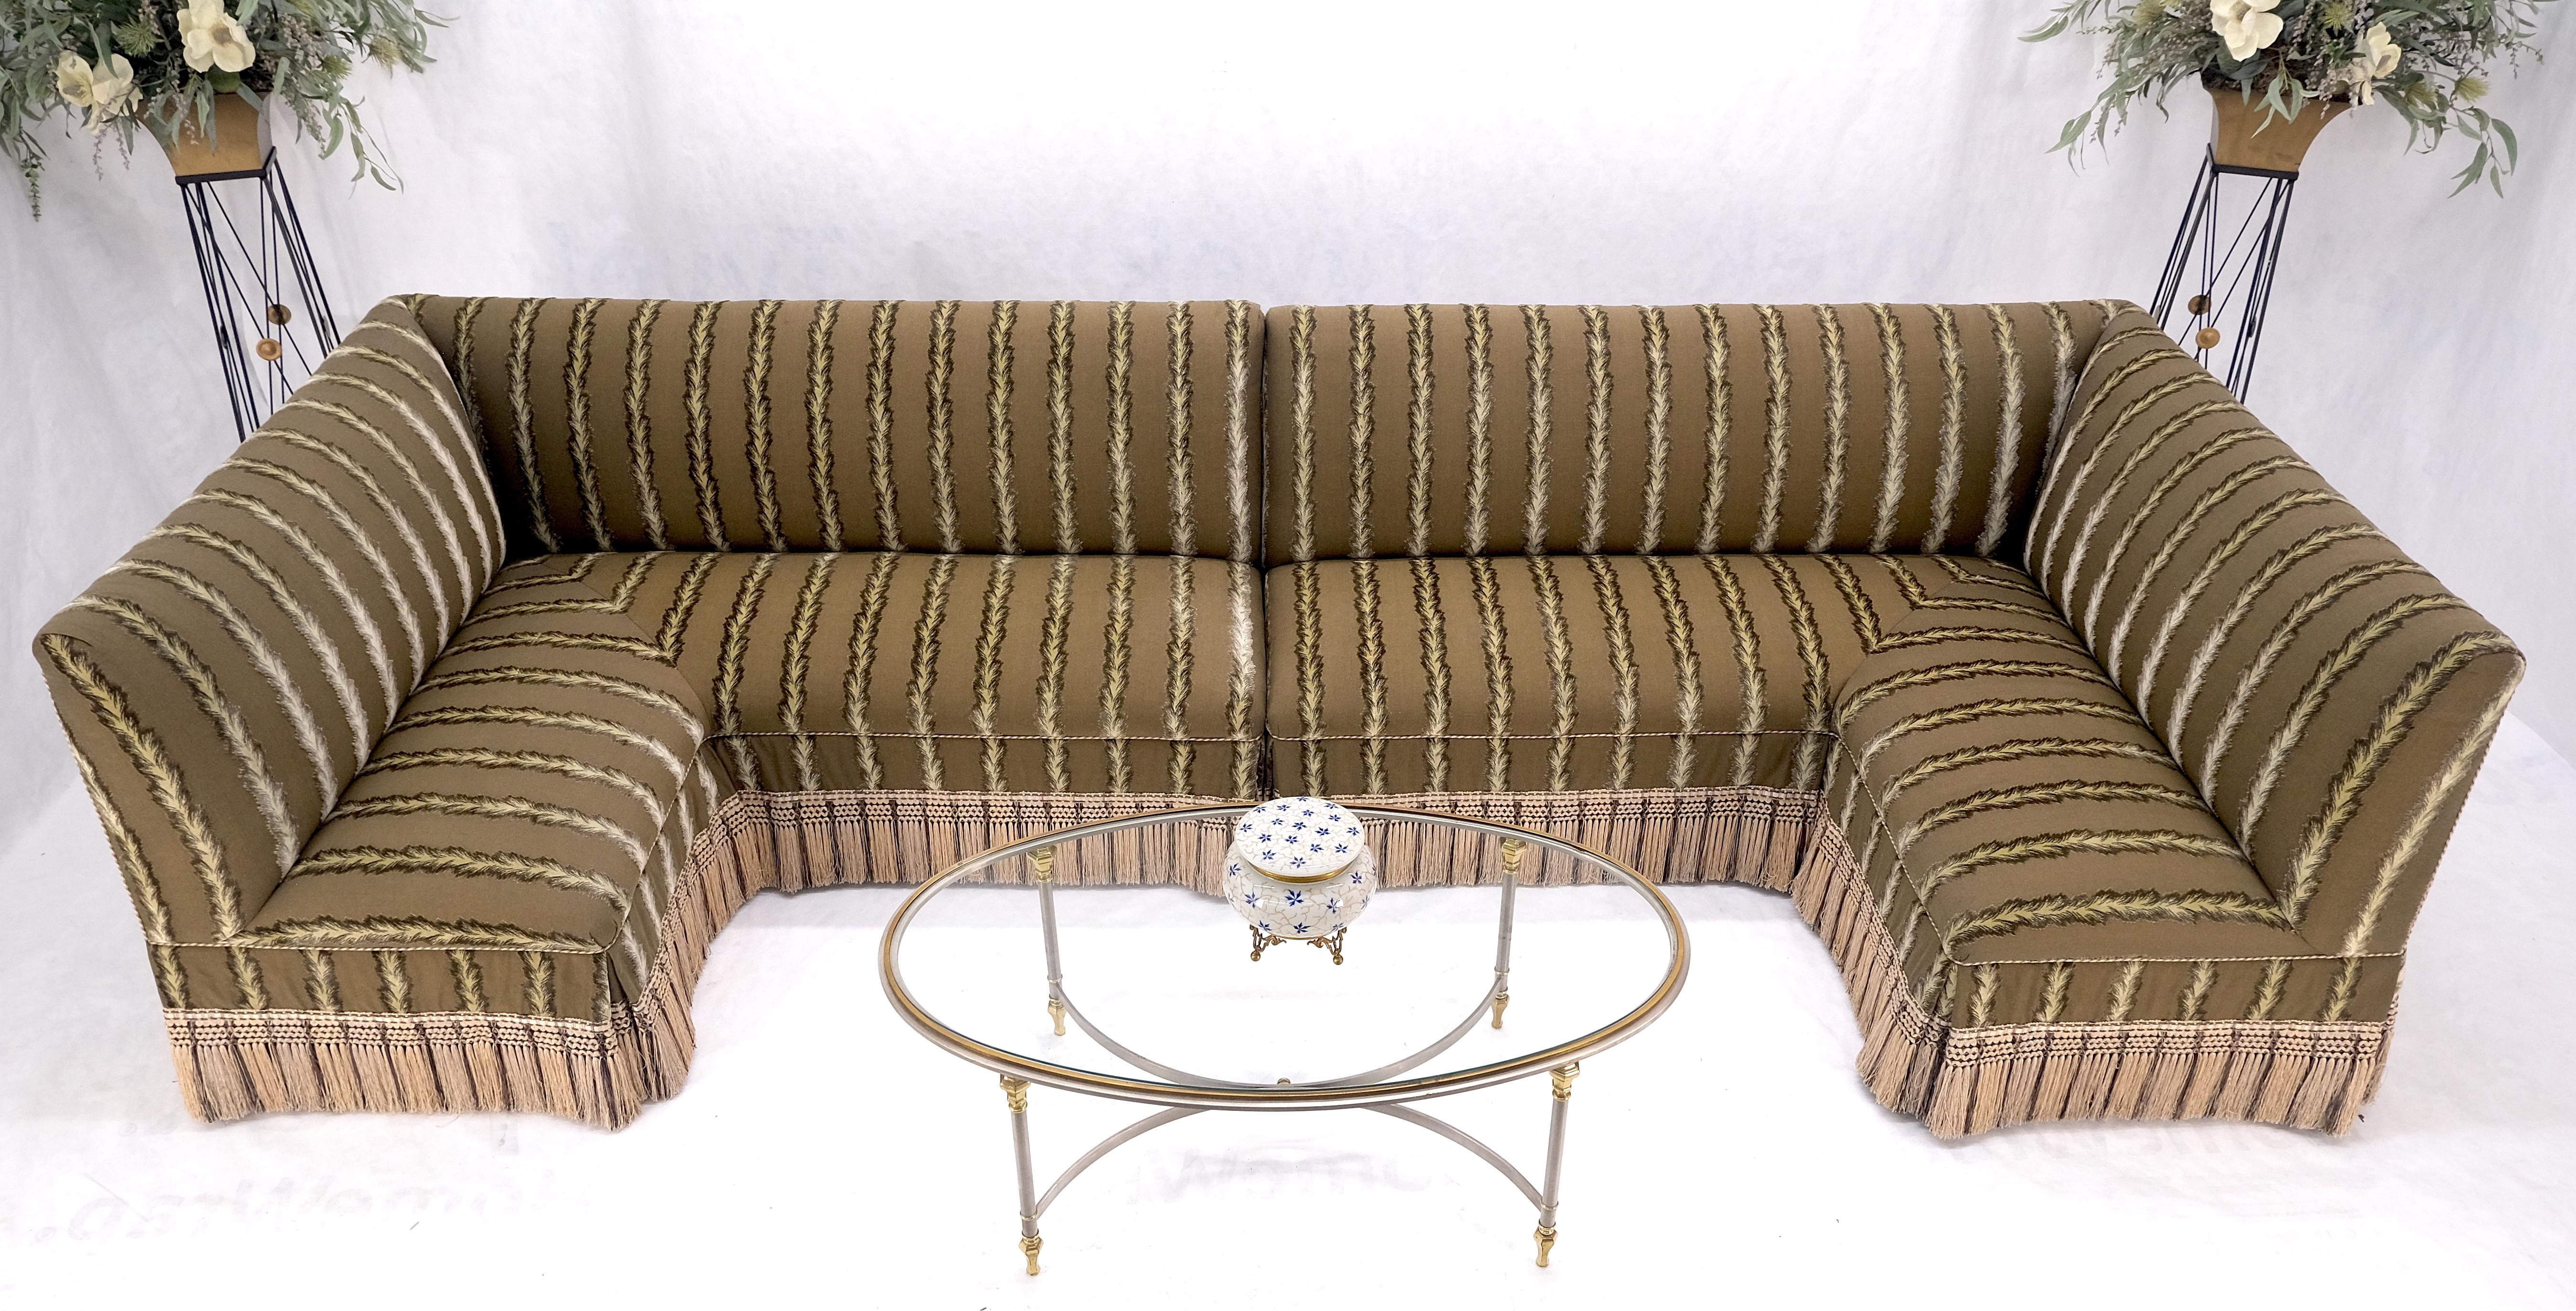 Measured individually. Offers long or short rectangle set up wrap around design sofa. Long set up measures 138